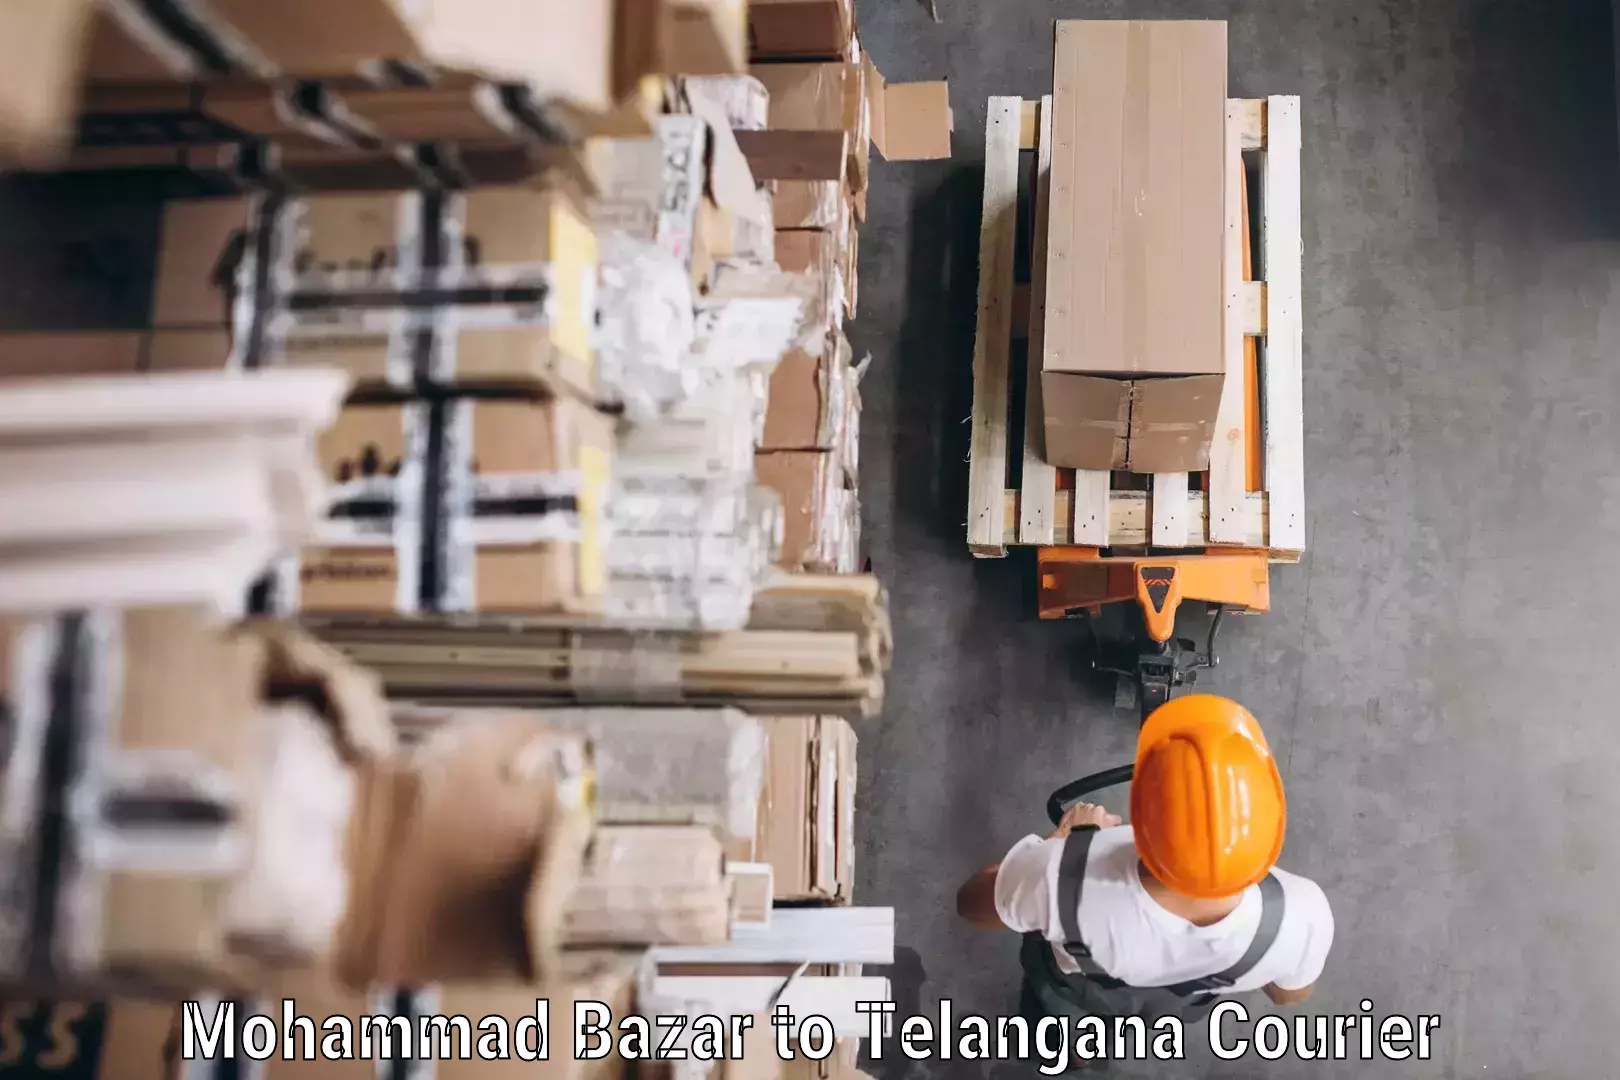 Pharmaceutical courier Mohammad Bazar to Telangana